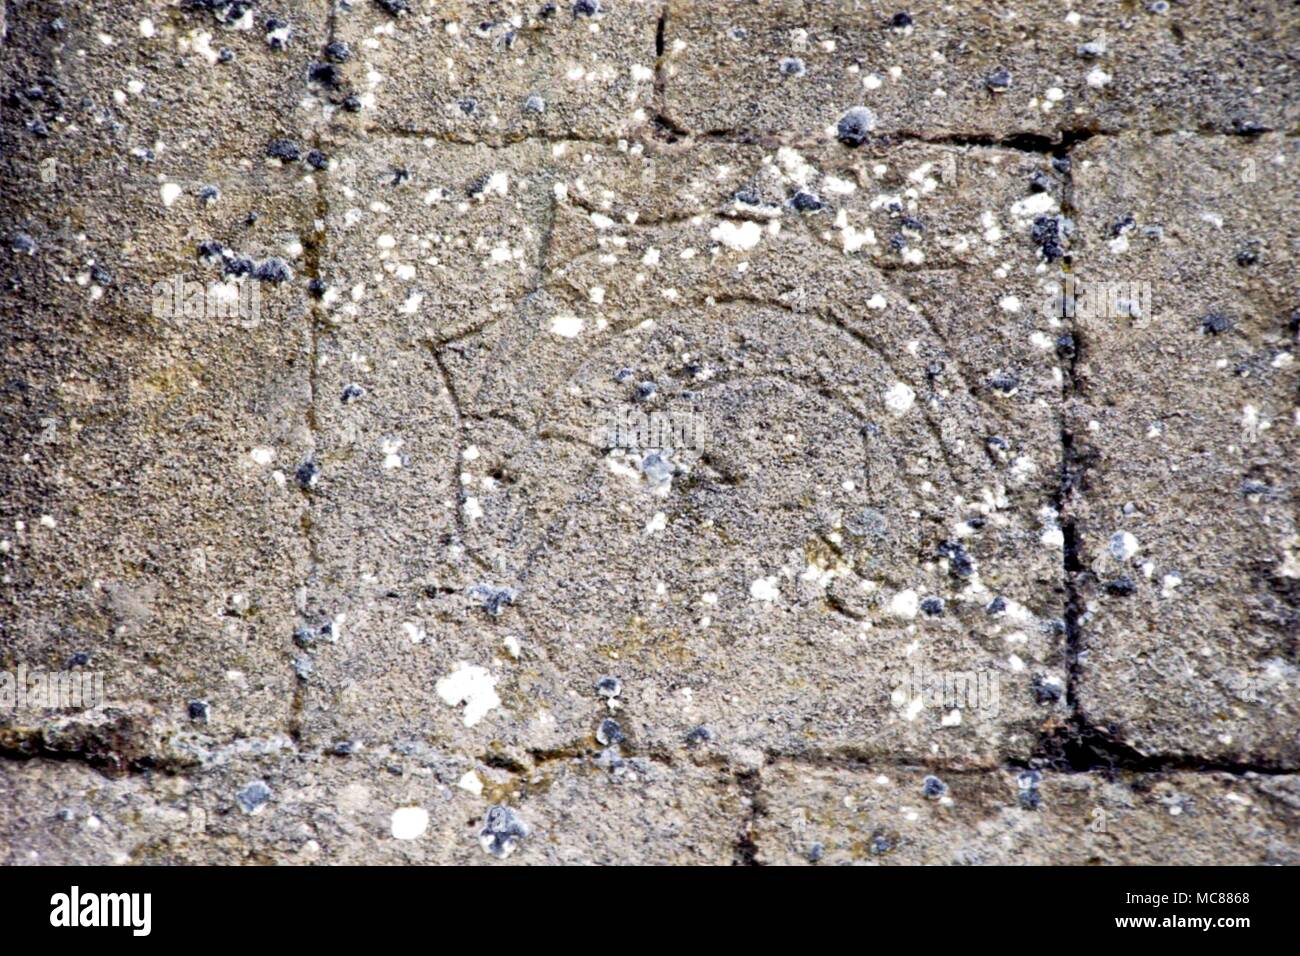 GLASTONBURY Sacred fish engraved high on the wall of the ruinous Abey of Glastonbury. The style would suggest that it was incised in the 14th century. The fish is a prime symbol of Christ Stock Photo